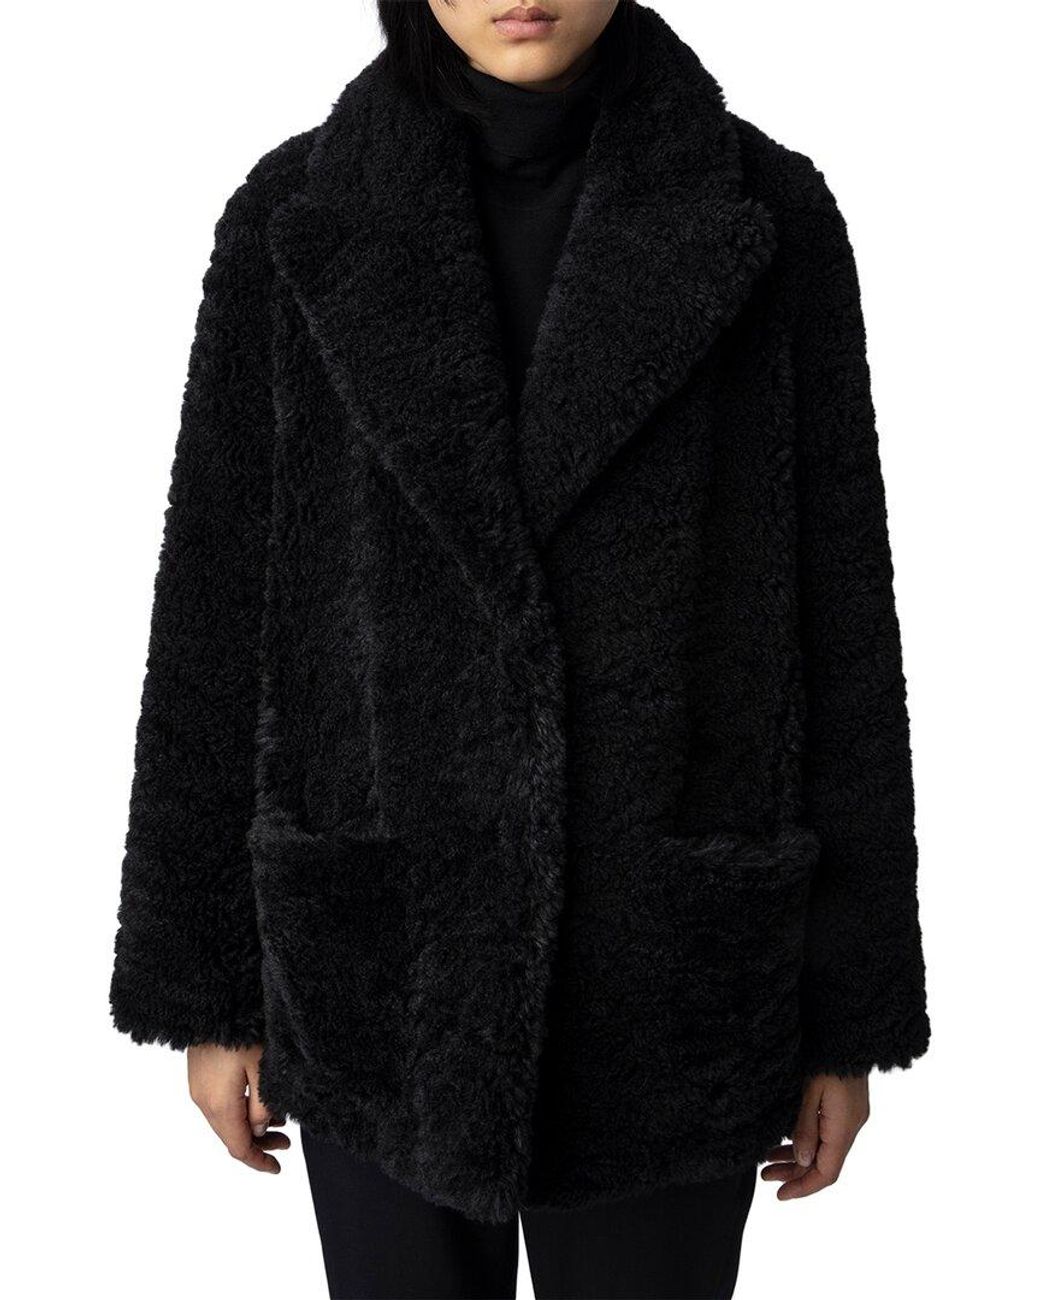 Zadig & Voltaire Fleur Soft Curly Cashmere Coat in Black | Lyst